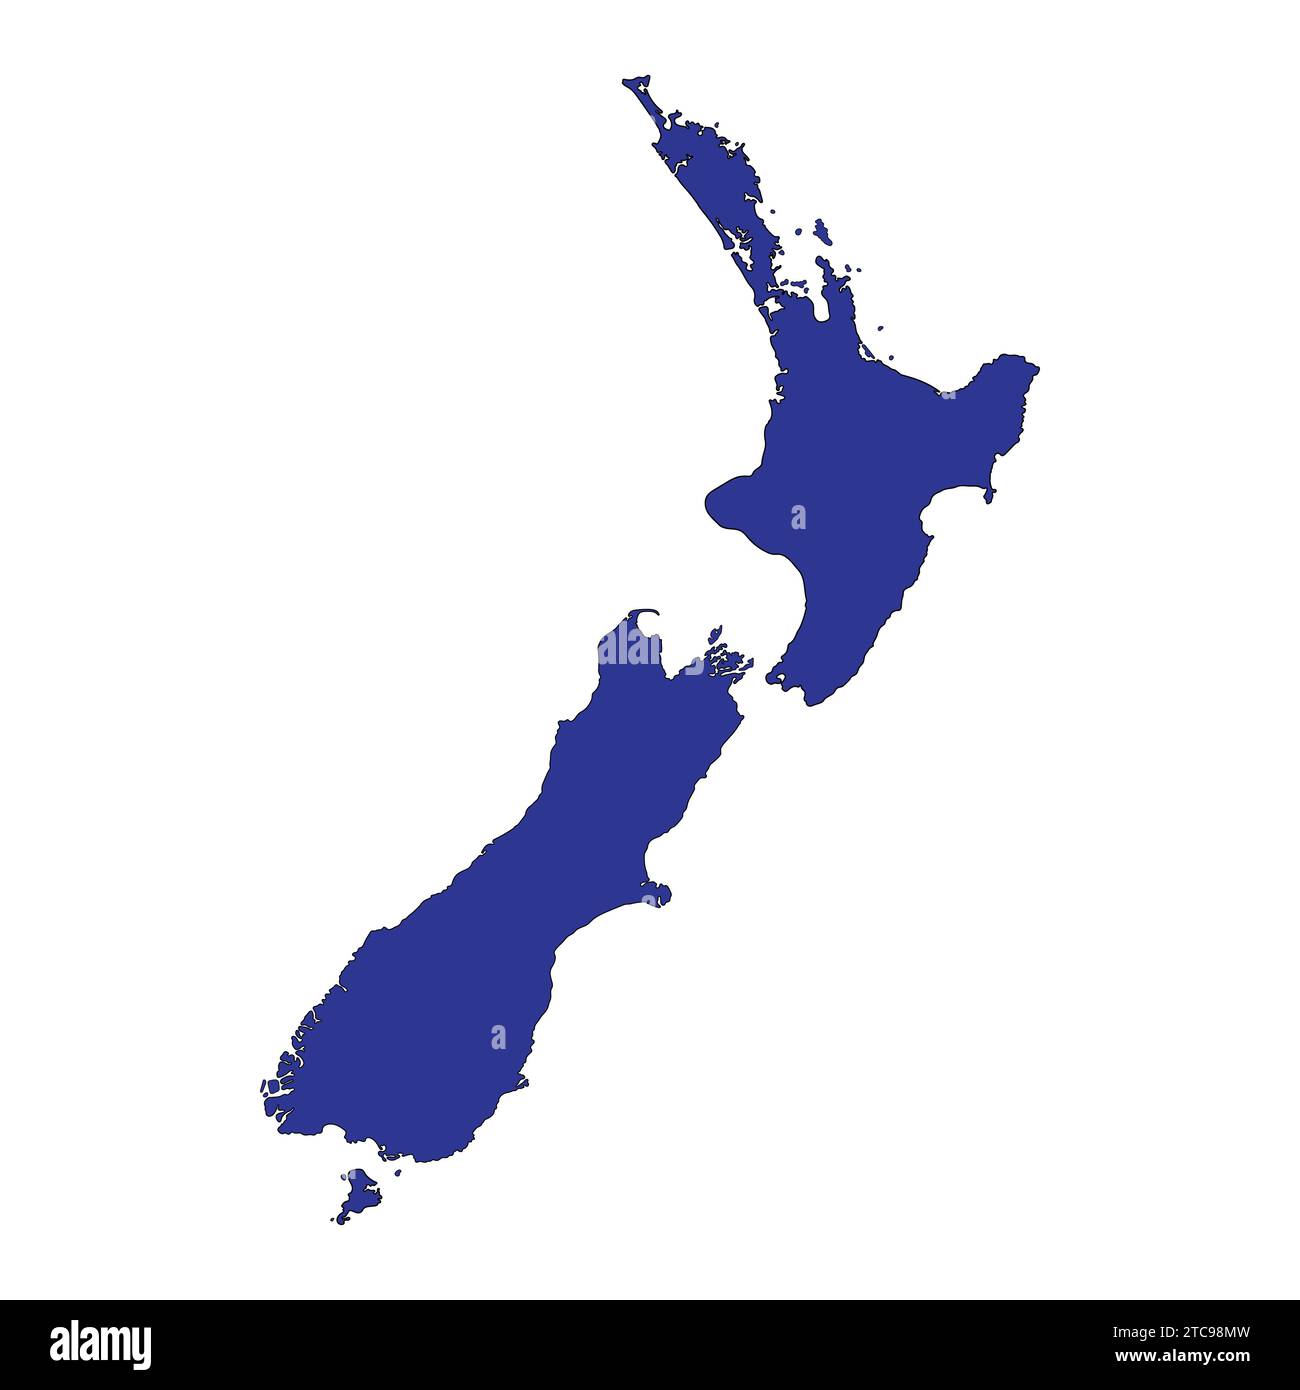 Flat Map of New Zealand Vector Icon Illustration New Zealand Map Stock Vector